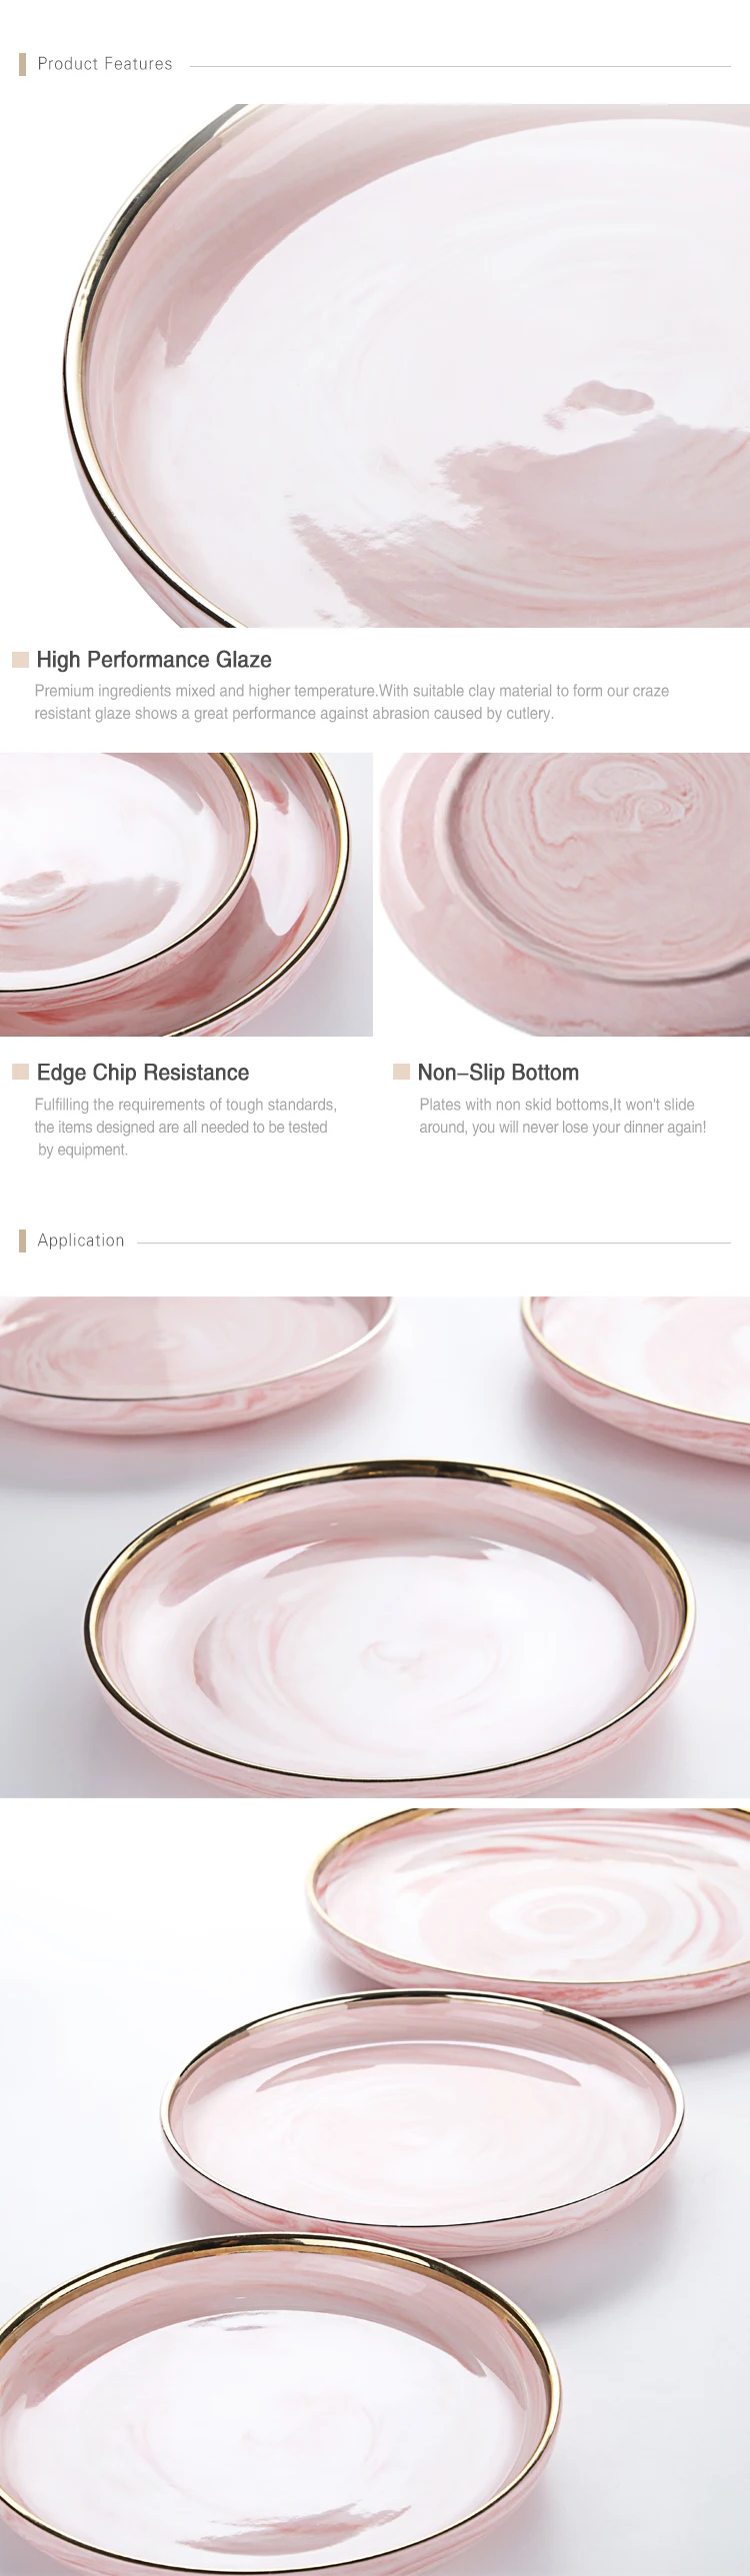 Luxury Hotel Supplies China Tableware, Hotel Restaurant Catering Porcelain Dinnerware Golden Plate Wedding Pink Marble Plate%